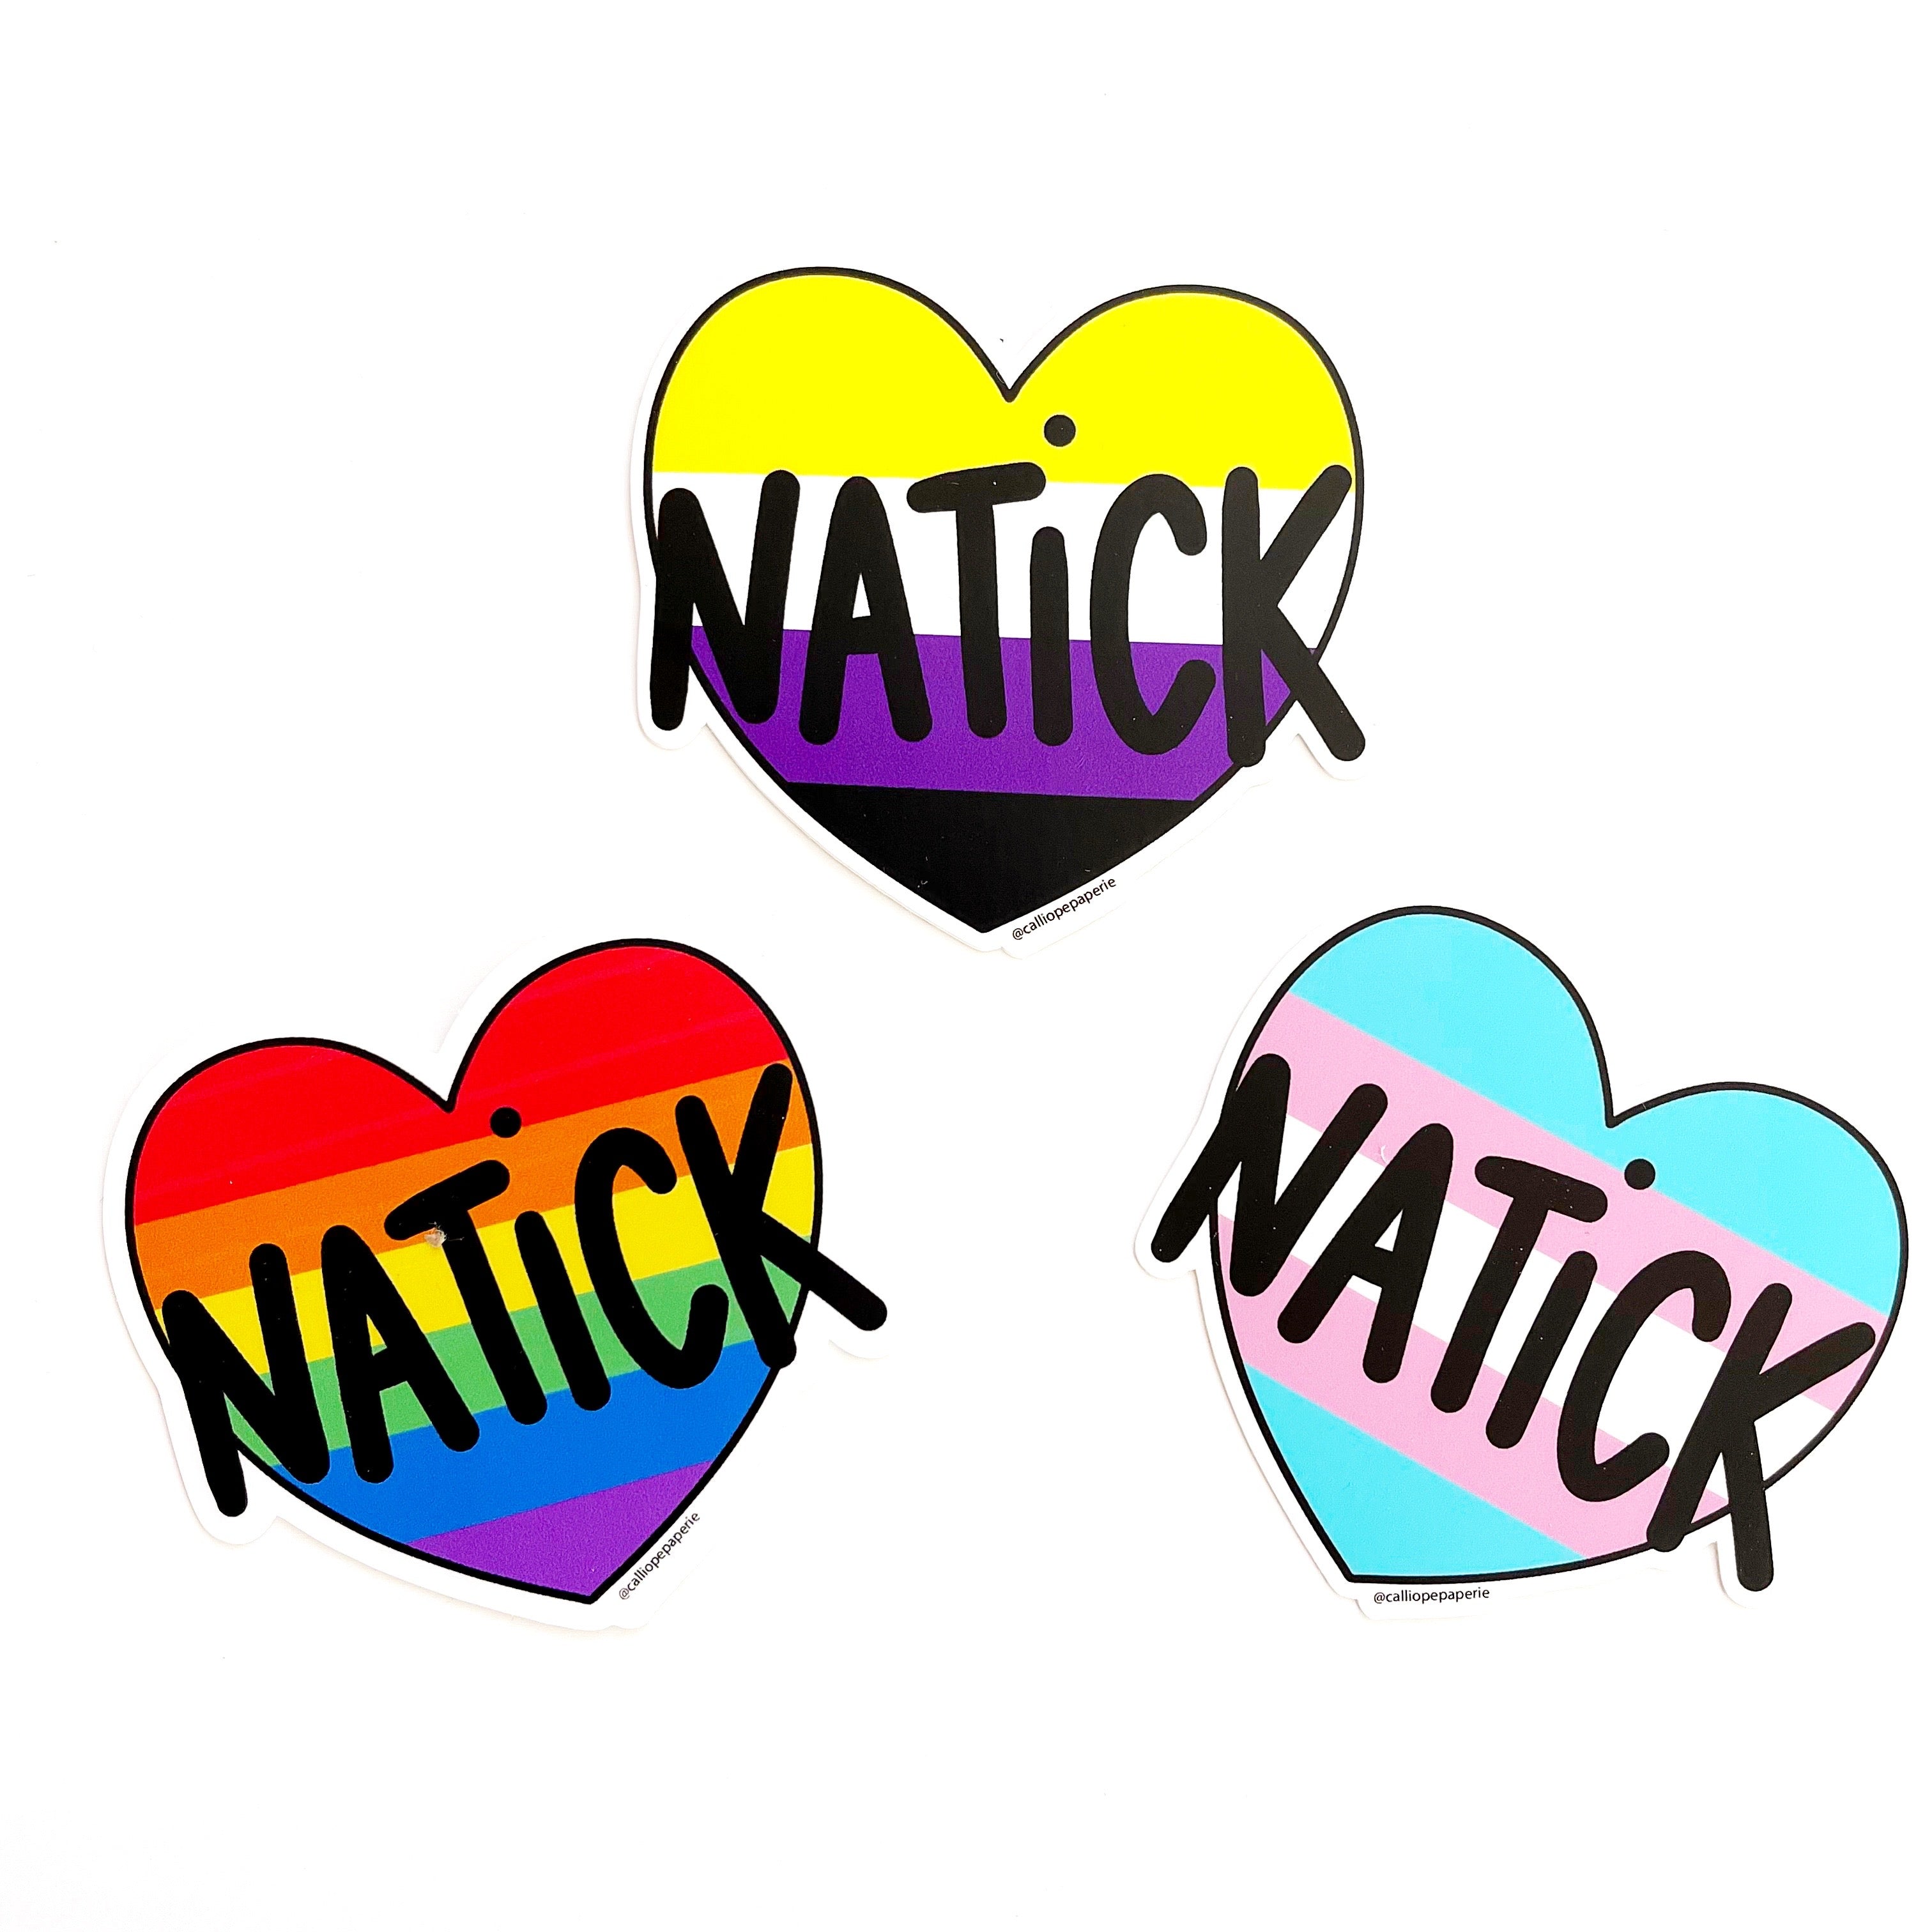 Images of three hearts, one with yellow, white, purple and black stripes, one rainbow stripes and one with blue, pink and white stripes wot black text says, "Natick". 